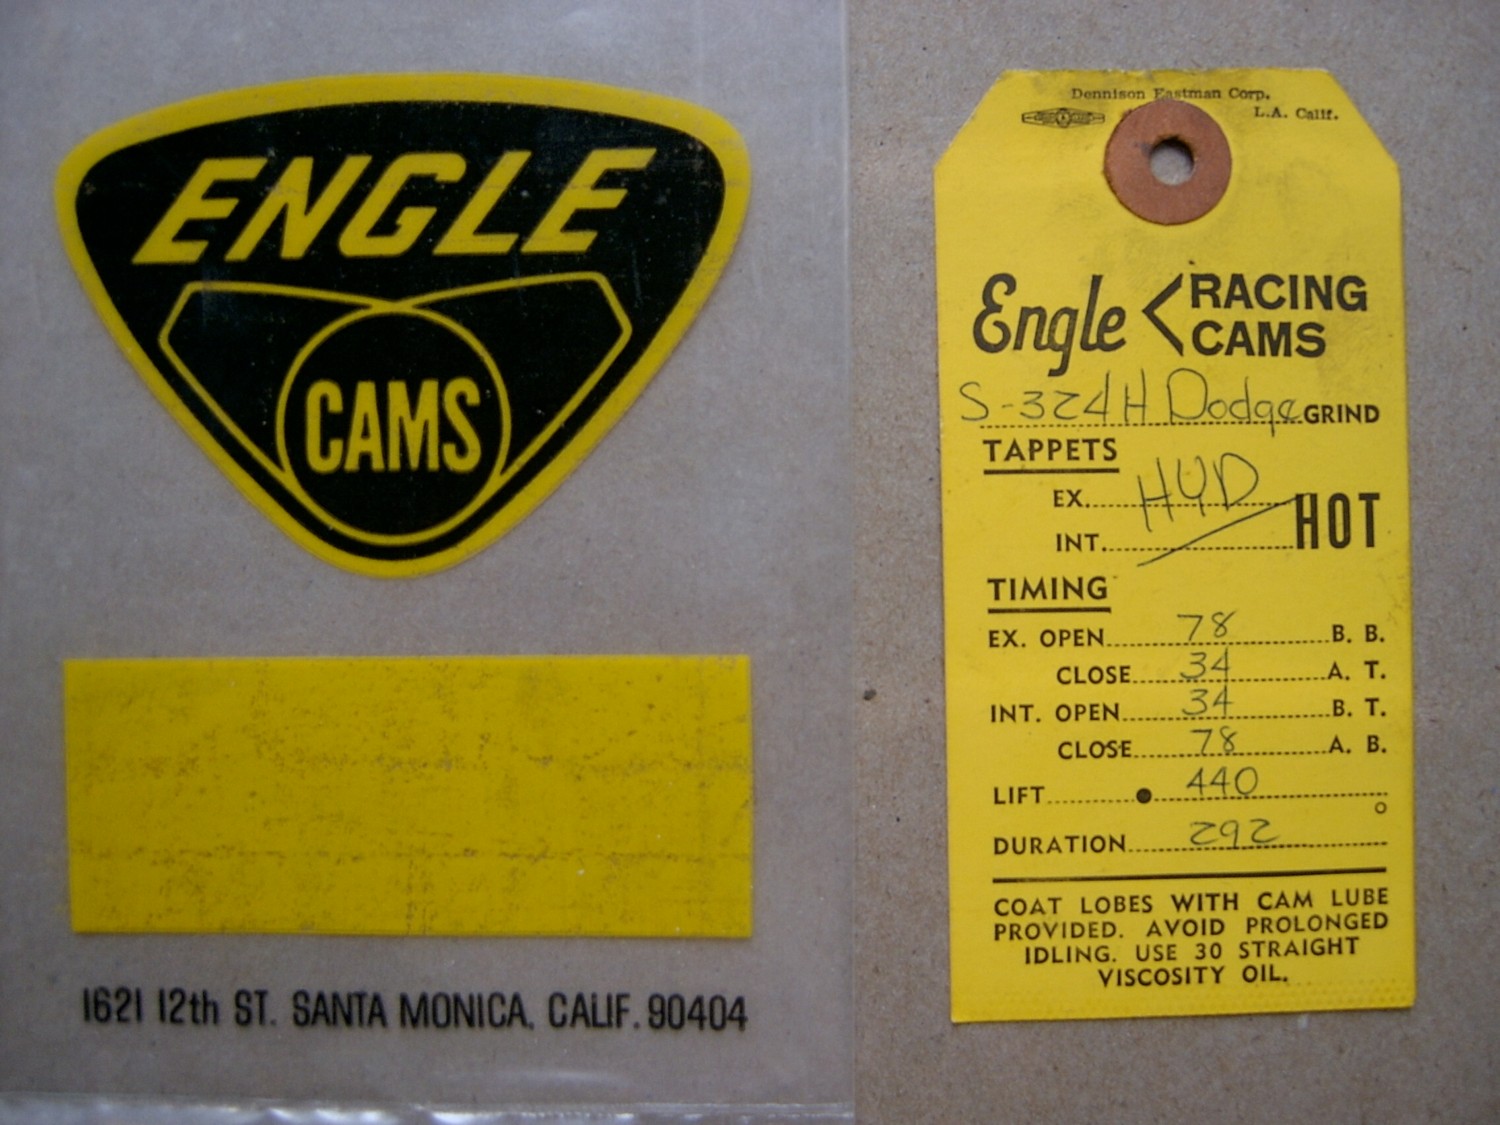 Opinion of Engle cams? - Moparts Forums